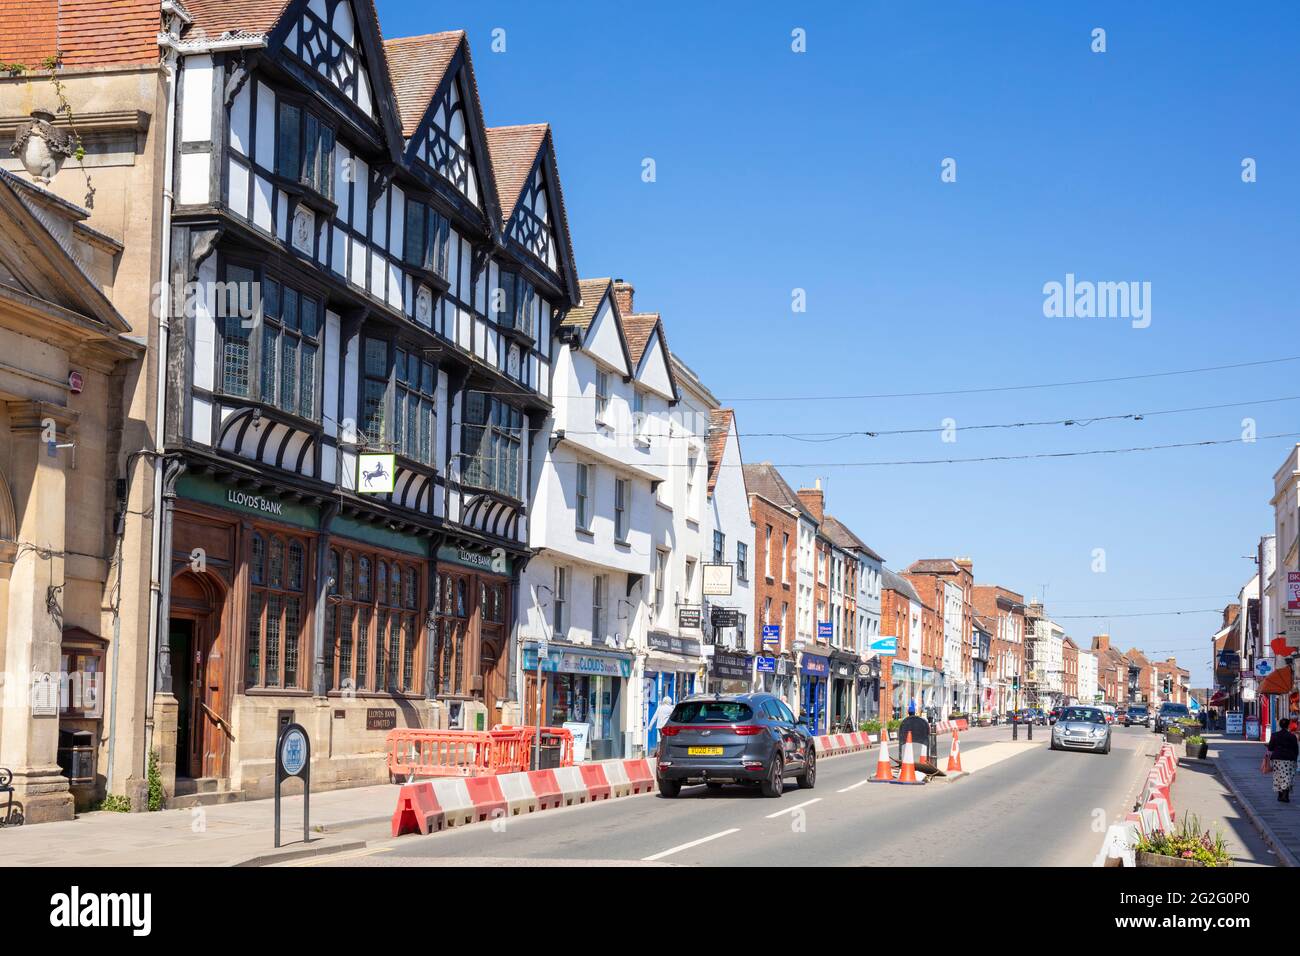 Tewkesbury High street with town centre shops and medieval buildings Tewkesbury, Gloucestershire, England, GB, UK, Europe Stock Photo